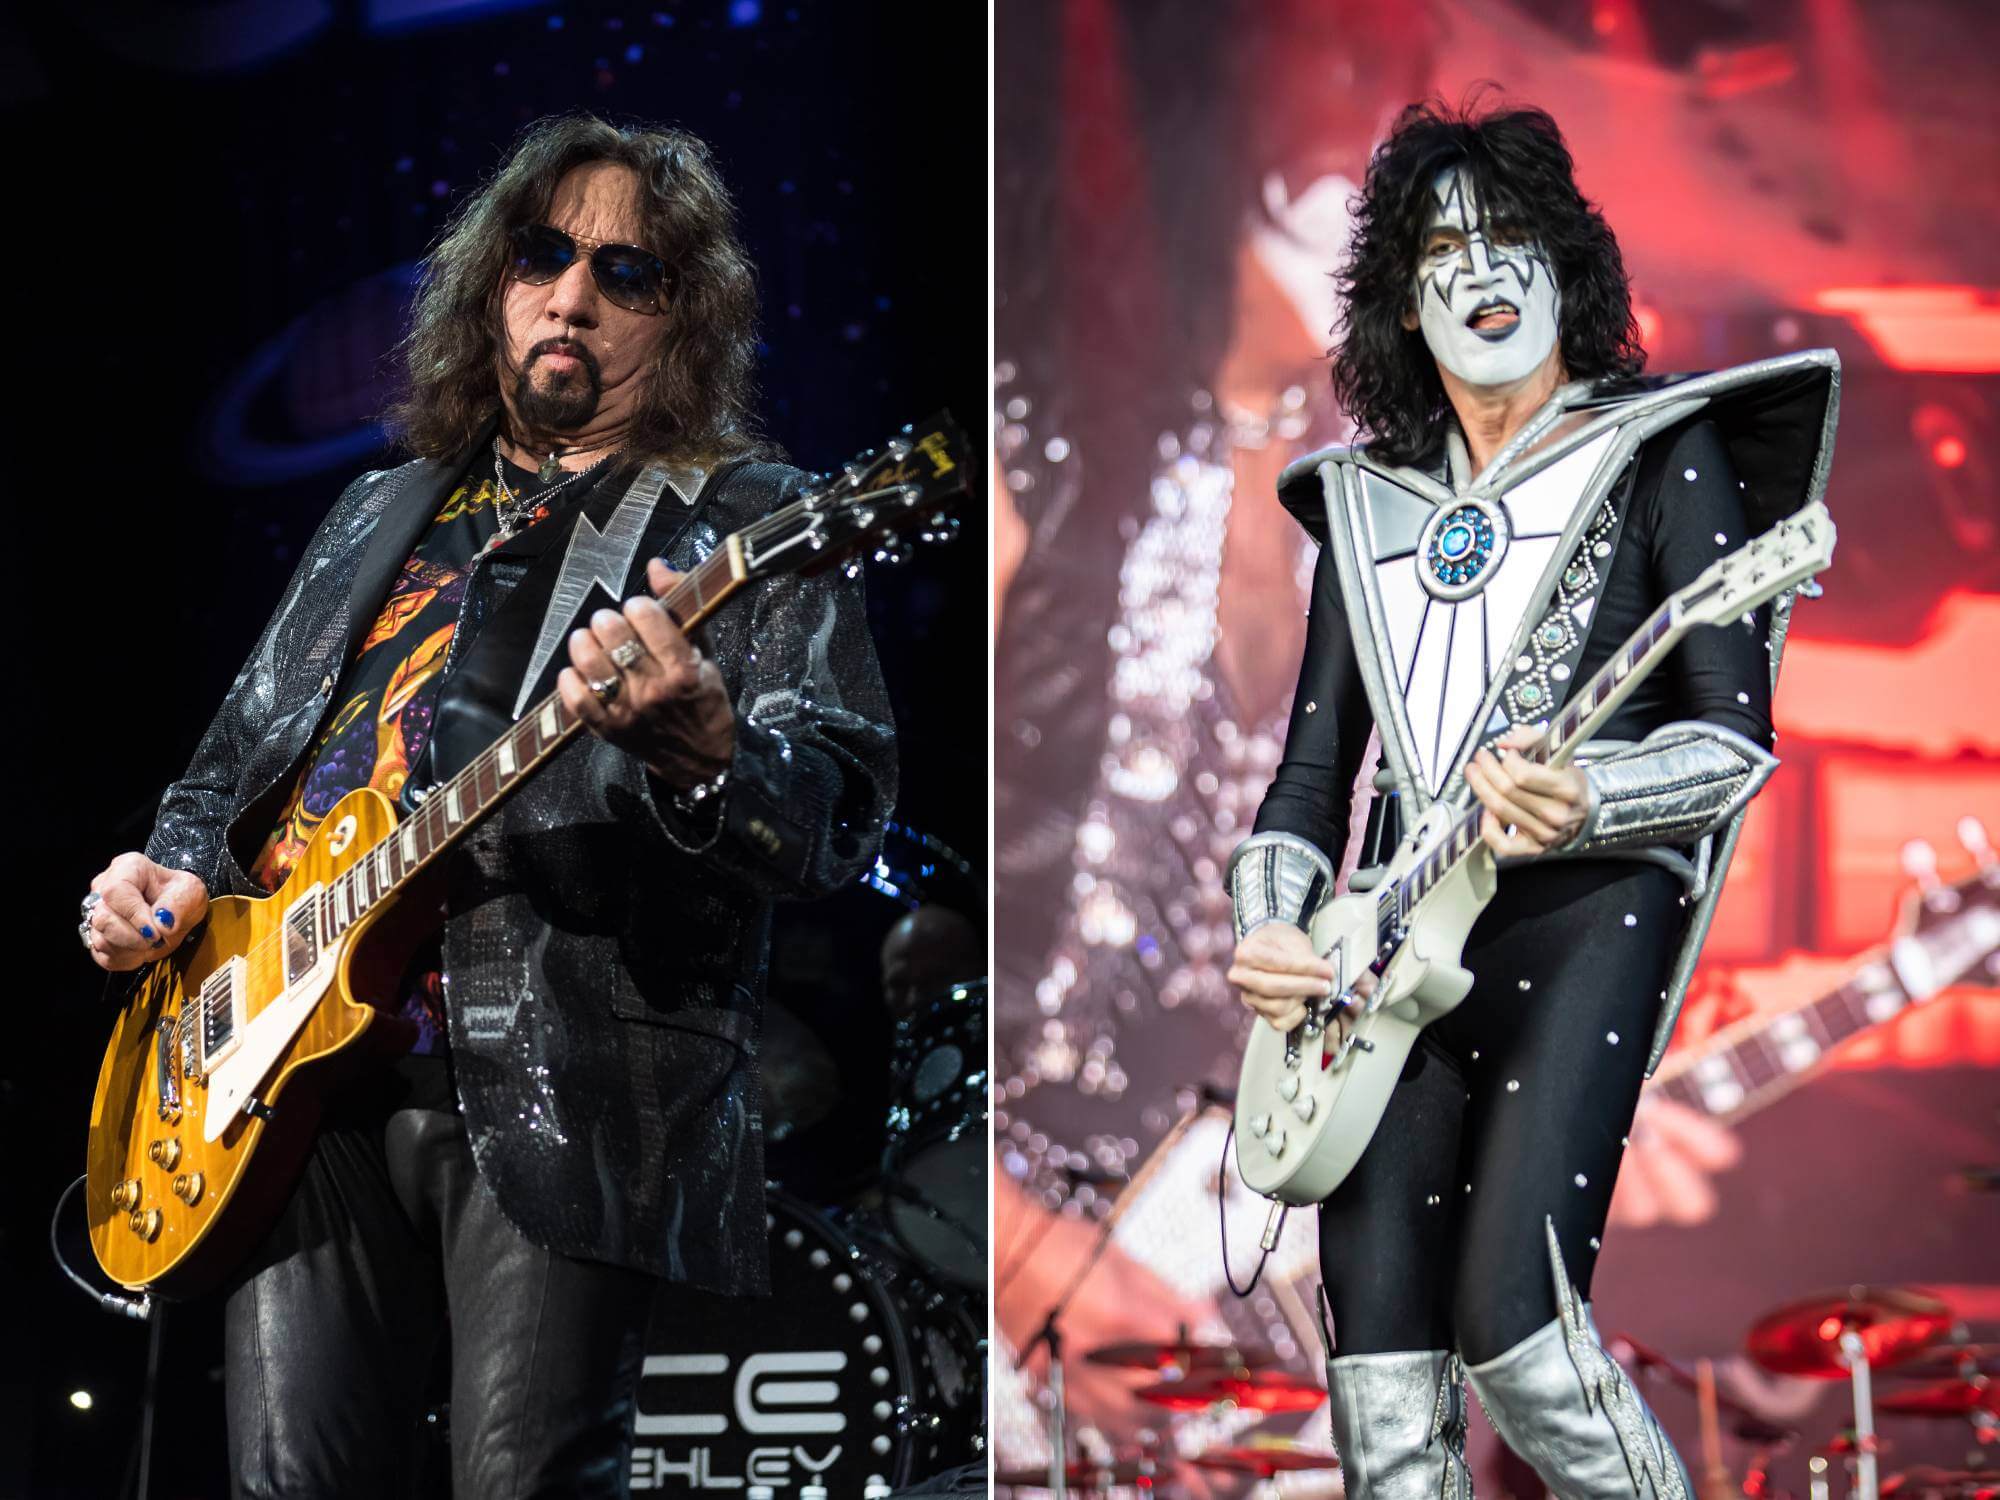 Ace Frehley and Tommy Thayer of Kiss